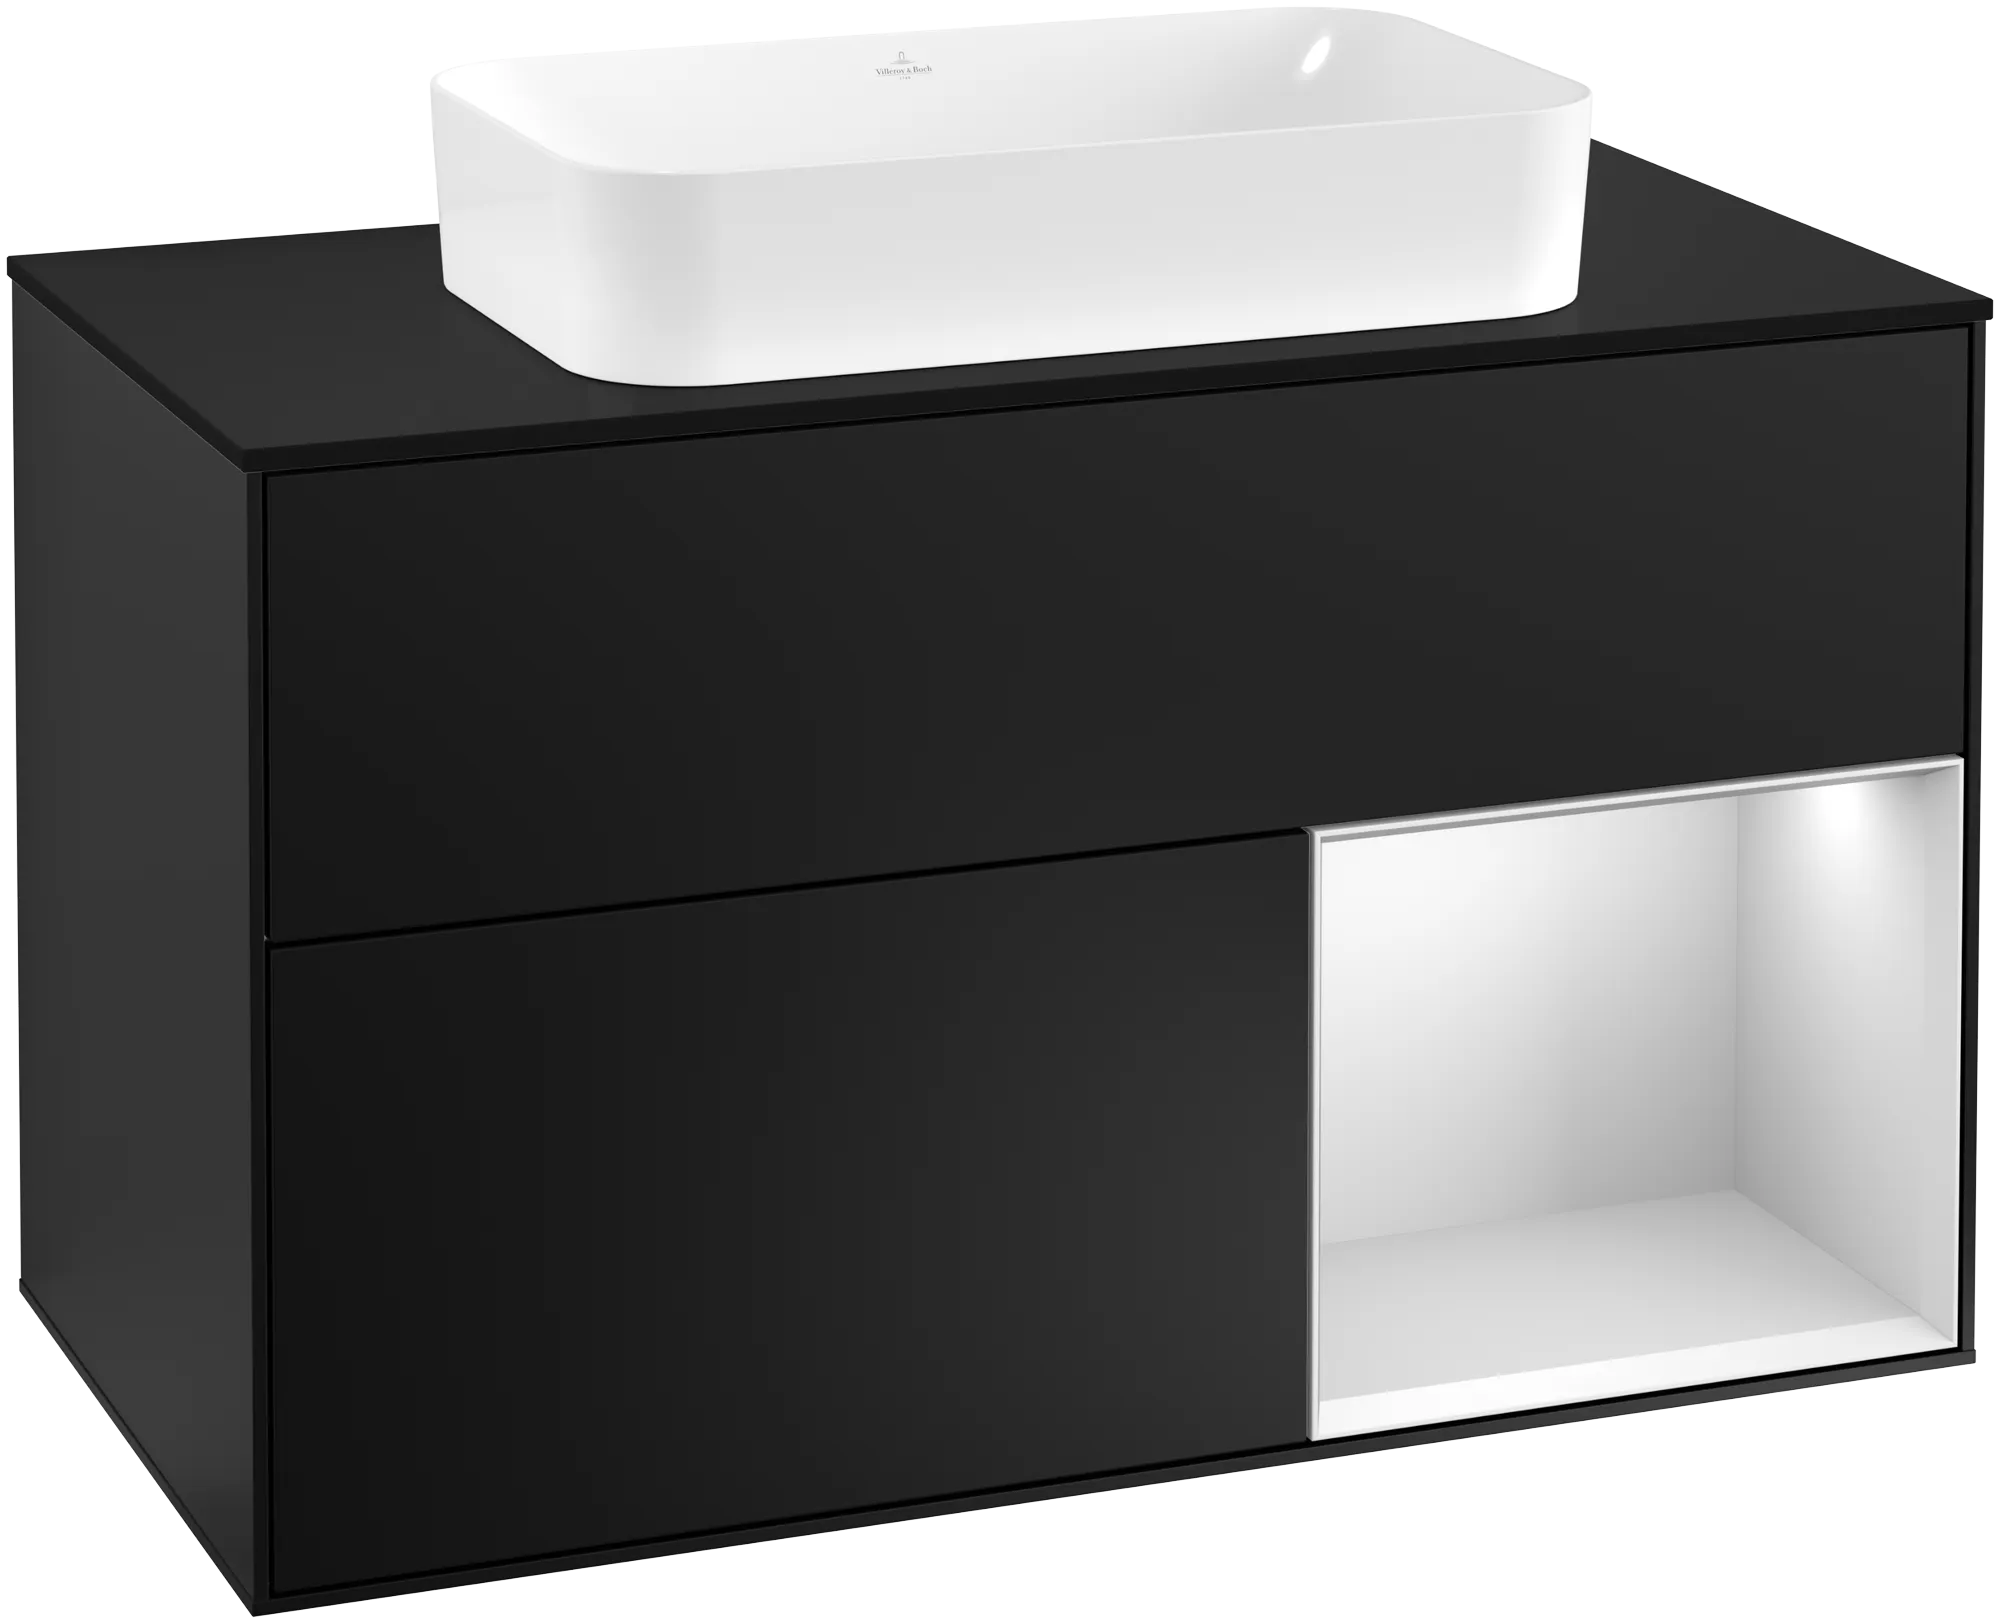 Picture of VILLEROY BOCH Finion Vanity unit, with lighting, 2 pull-out compartments, 1000 x 603 x 501 mm, Black Matt Lacquer / White Matt Lacquer / Glass Black Matt #F252MTPD